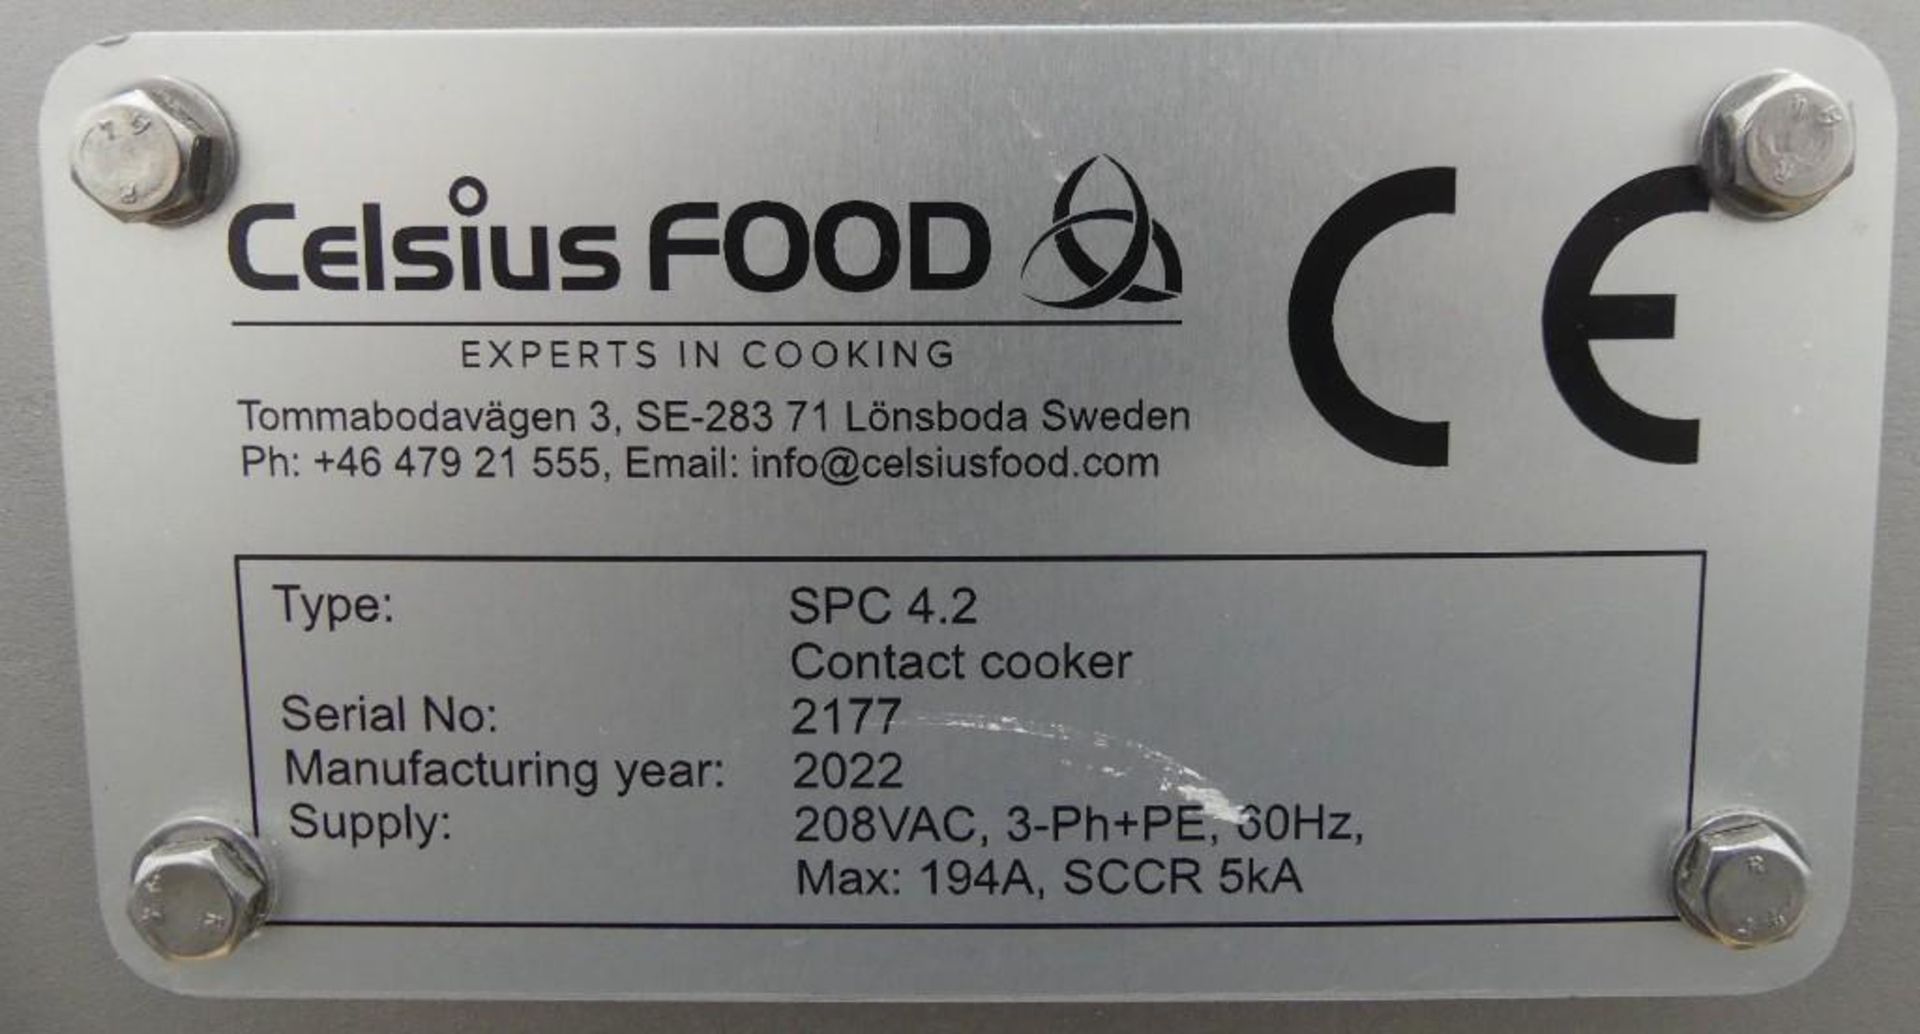 Celsius SPC 4.2 Stainless Steel Contact Cooker - Image 36 of 39